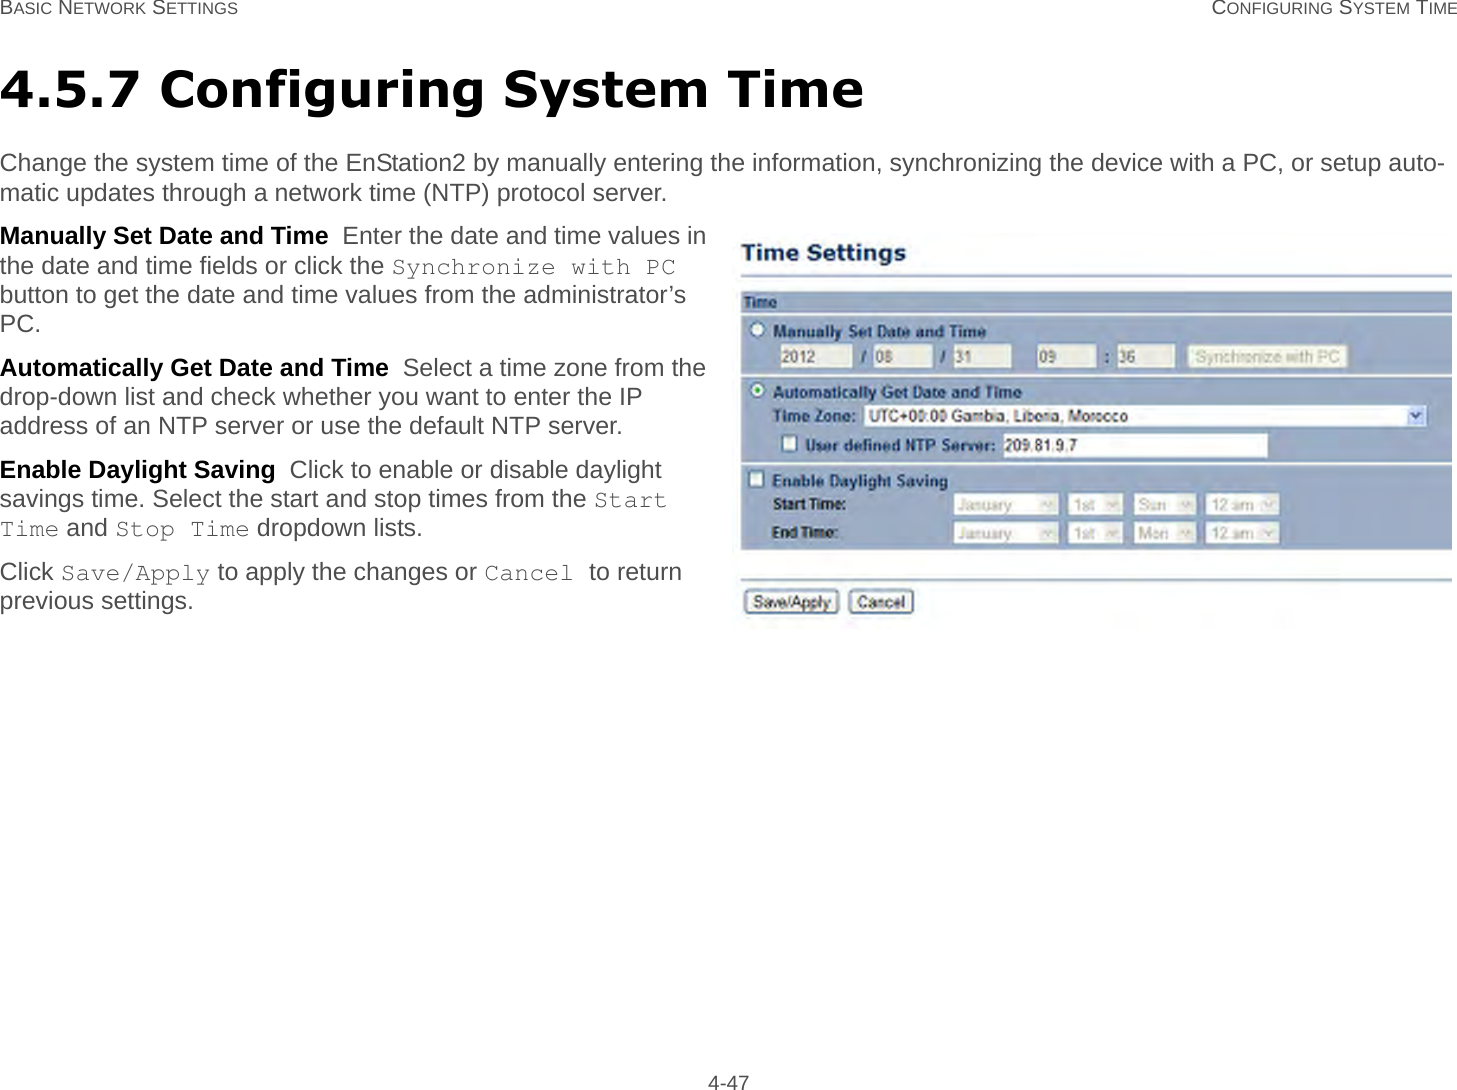 BASIC NETWORK SETTINGS CONFIGURING SYSTEM TIME 4-474.5.7 Configuring System TimeChange the system time of the EnStation2 by manually entering the information, synchronizing the device with a PC, or setup auto-matic updates through a network time (NTP) protocol server.Manually Set Date and Time  Enter the date and time values in the date and time fields or click the Synchronize with PC button to get the date and time values from the administrator’s PC.Automatically Get Date and Time  Select a time zone from the drop-down list and check whether you want to enter the IP address of an NTP server or use the default NTP server.Enable Daylight Saving  Click to enable or disable daylight savings time. Select the start and stop times from the Start Time and Stop Time dropdown lists.Click Save/Apply to apply the changes or Cancel to return previous settings.